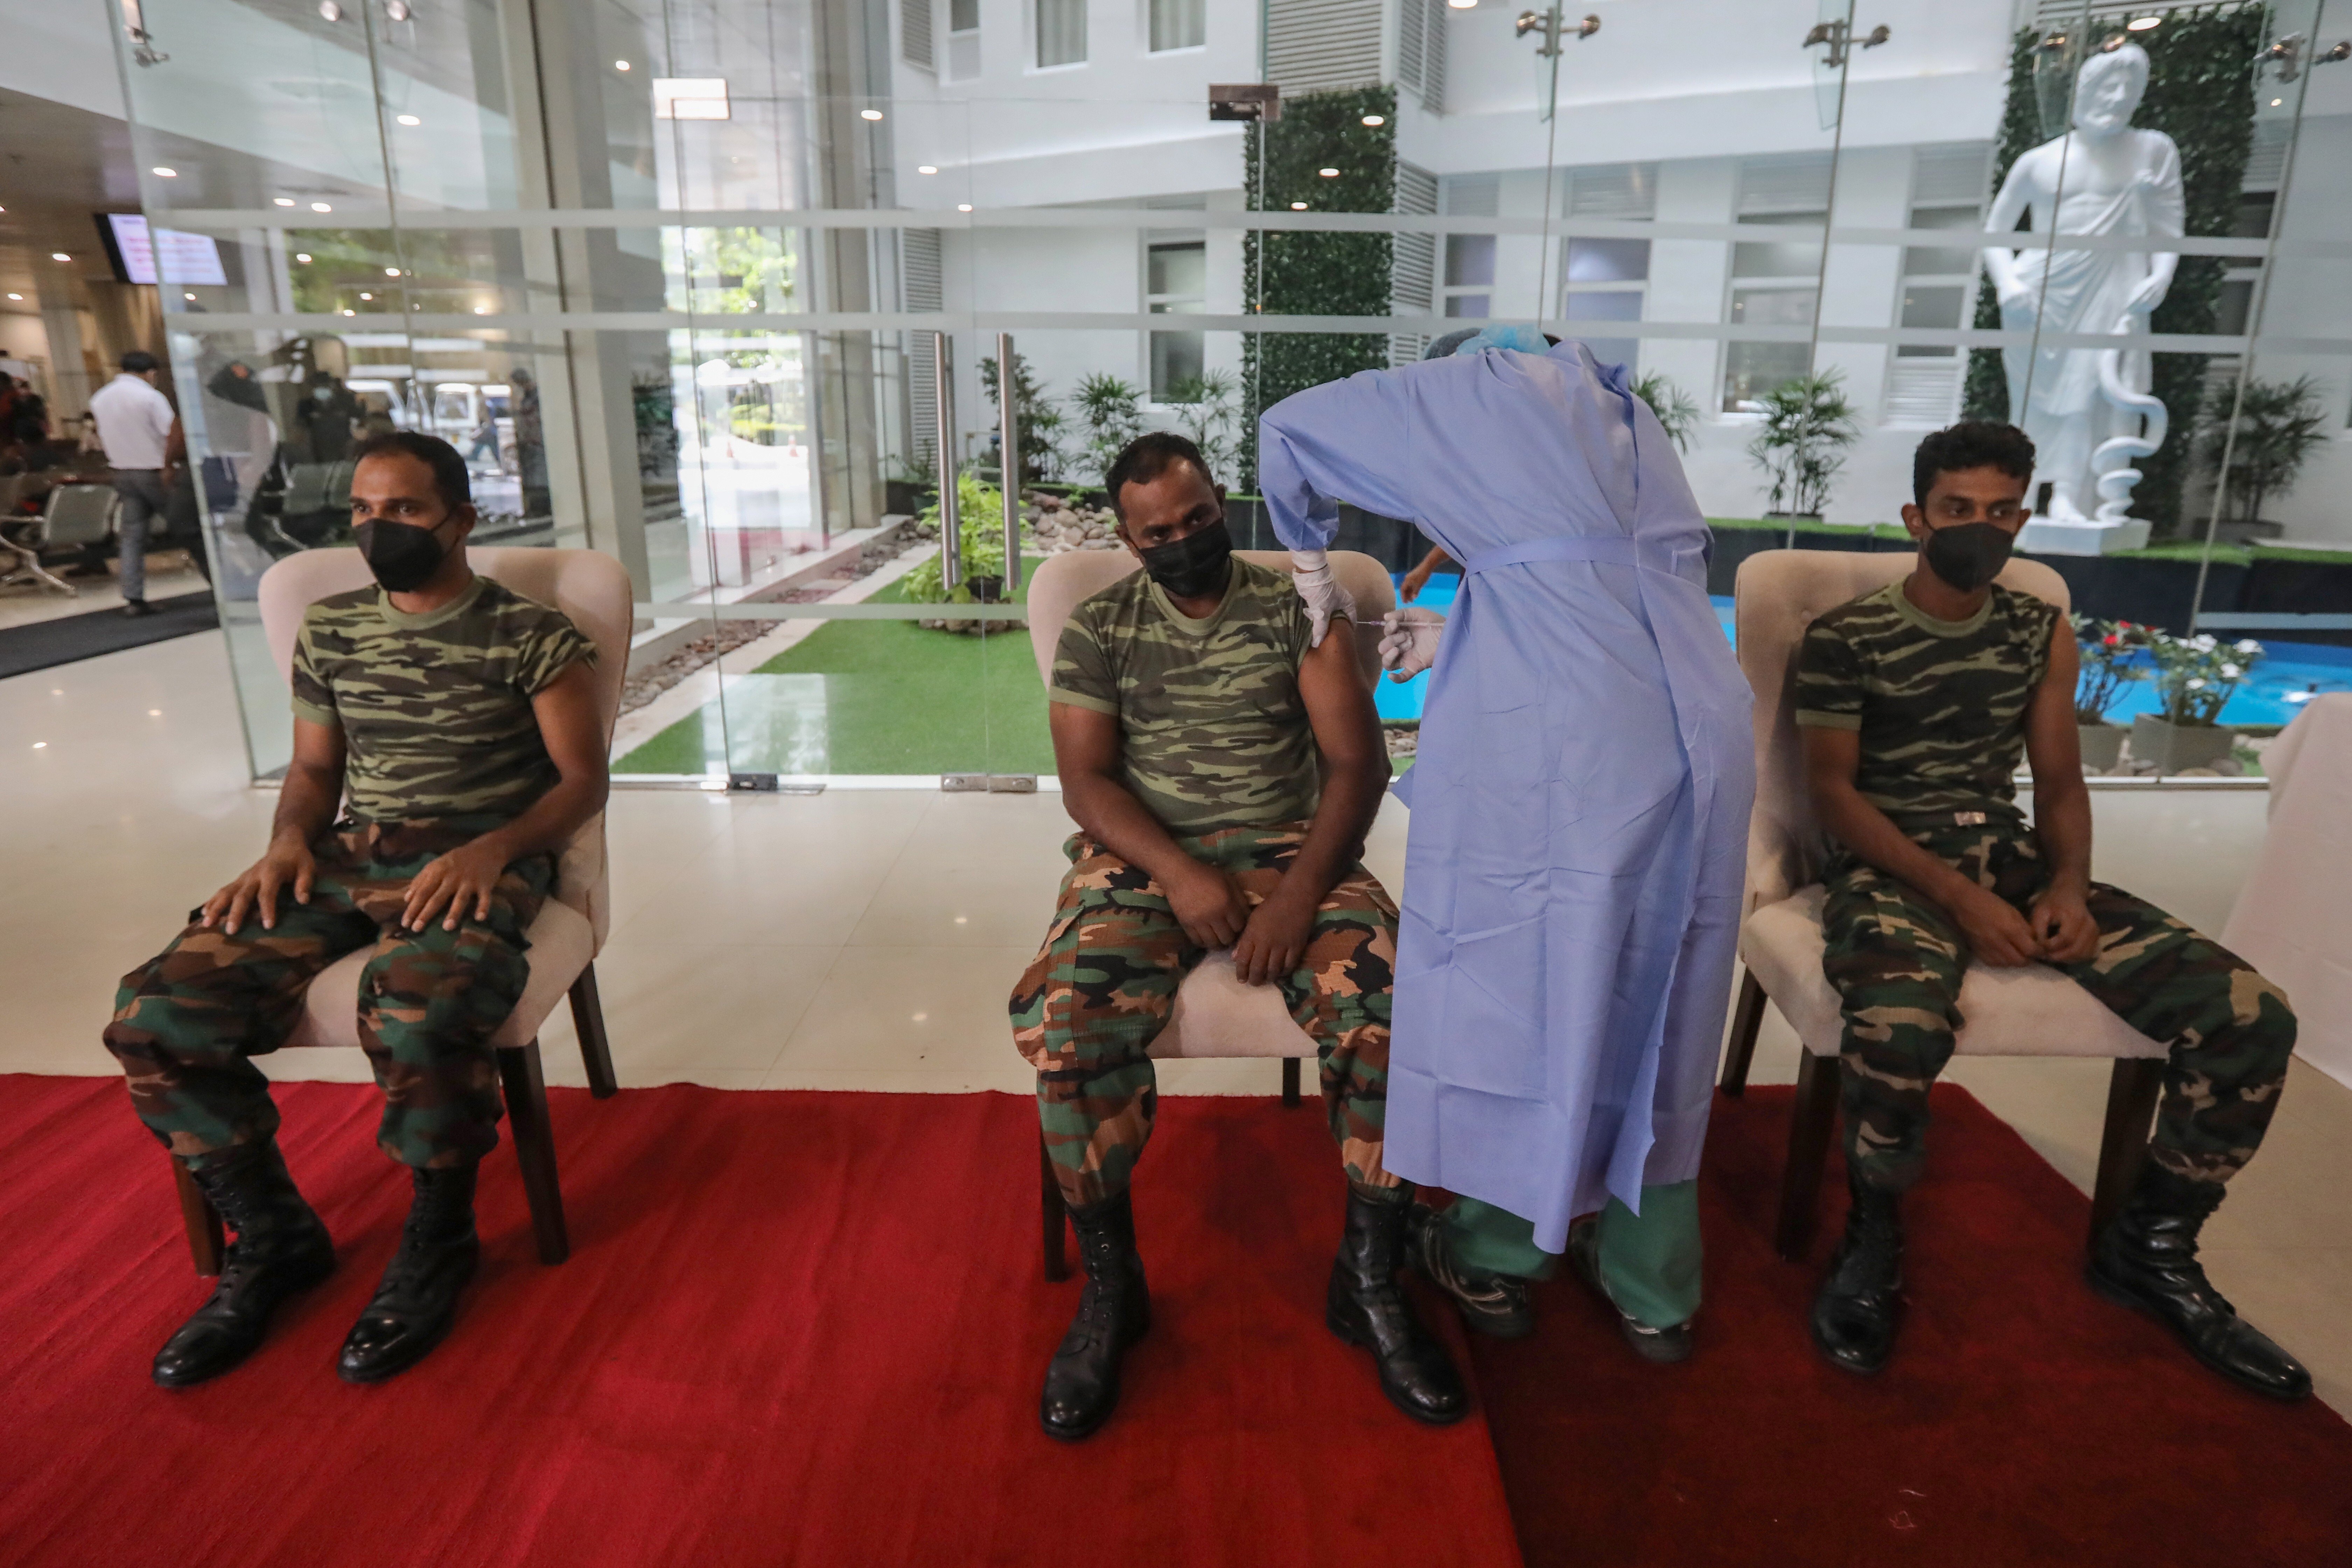 Sri Lankan soldiers receive their booster dose against Covid-19 at a military hospital in Colombo. The nation’s economy shrank a record 3.6 per cent in 2020 because of the pandemic. Now the government has announced a tax on car accidents to help claw some money back. Photo: EPA-EFE